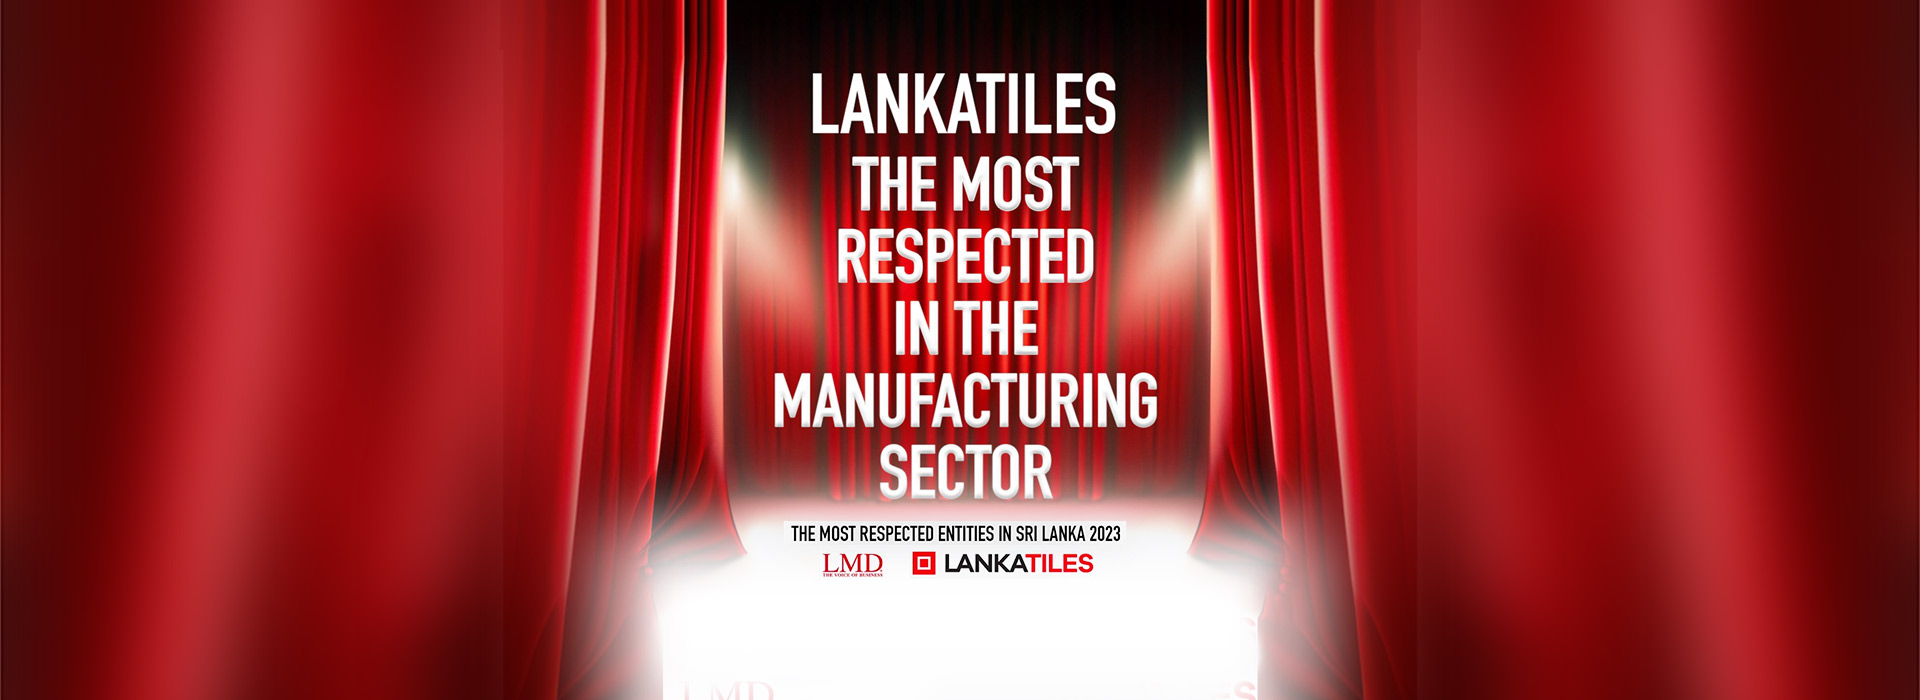 Lankatiles Ranks No. 1 In The Manufacturing Industry In Lmd’s Most Respected Entities In Sri Lanka 2023